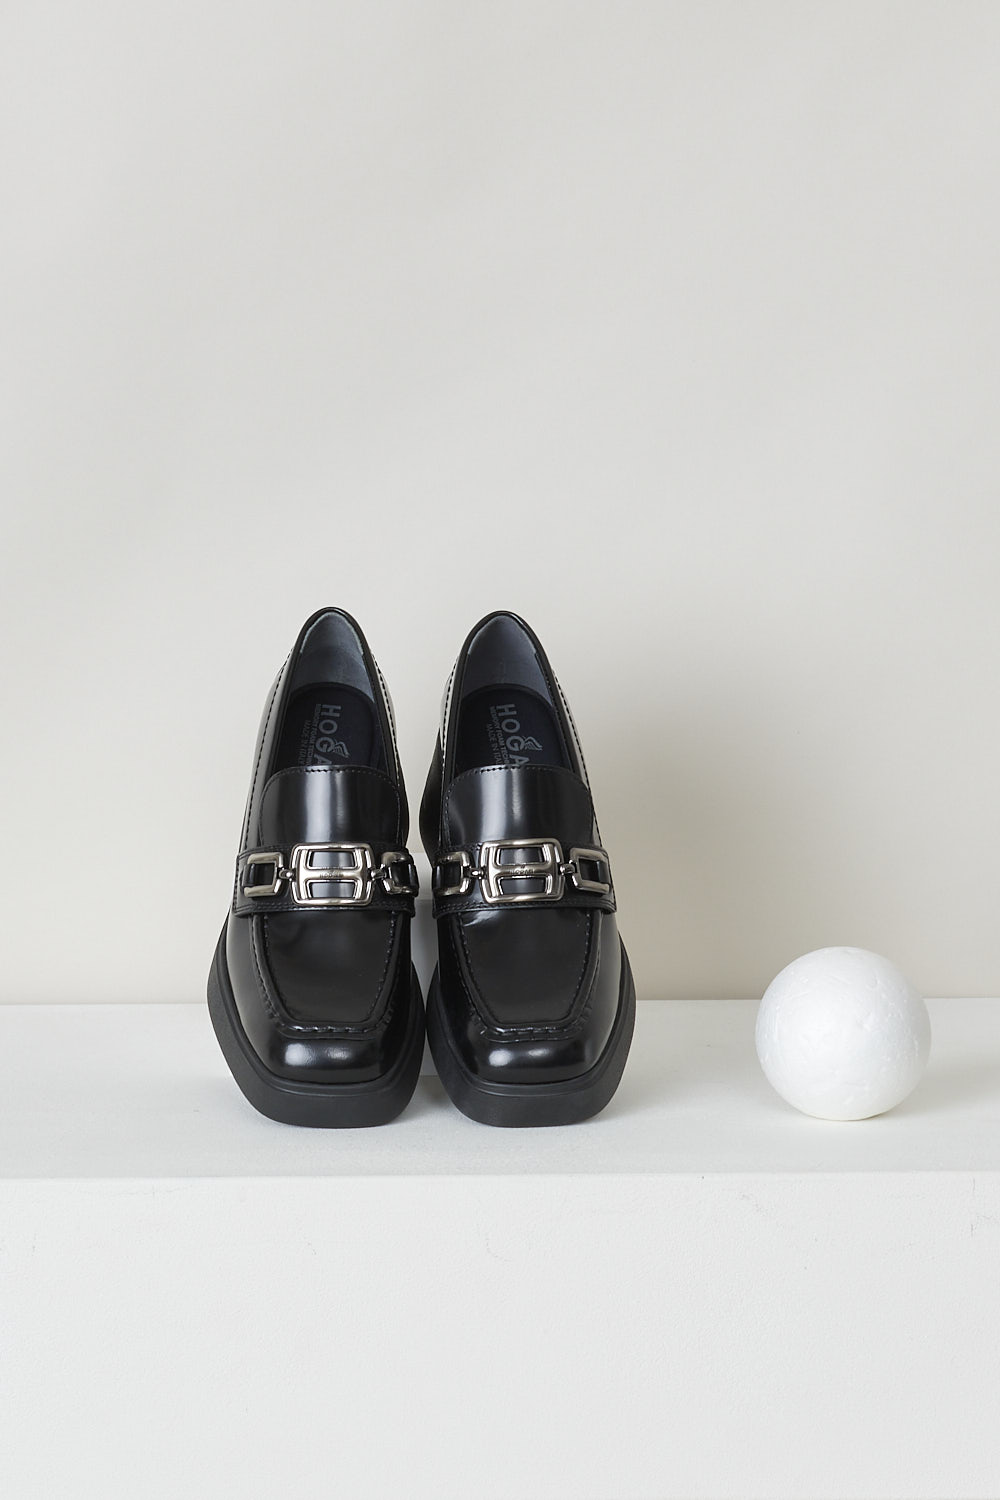 HOGAN, BLACK HEELED MOCCASINS, HXW6180EP40RWWB999_H618_MOCASSINO_ACCESSORIO, Black, Top, These slip-on loafers have a squared off toe with toe stitching and an silver-tone H-shaped buckle over the upper side. The loafers have a chunky black sole. 

